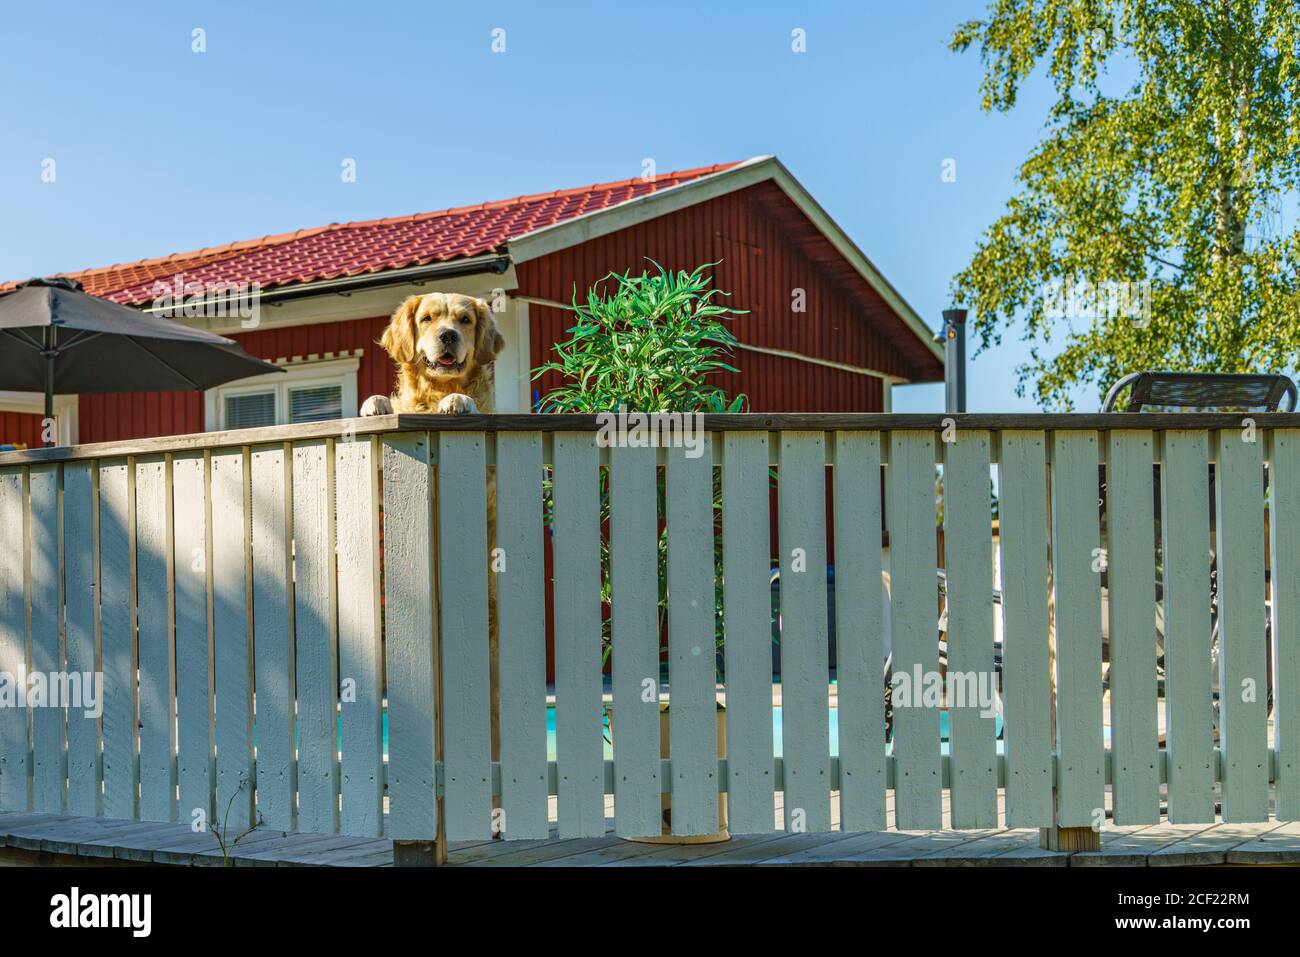 Golden retriever standing on his backlegs looking over a fence gurdaing his house, Gnesta, Sweden Stock Photo